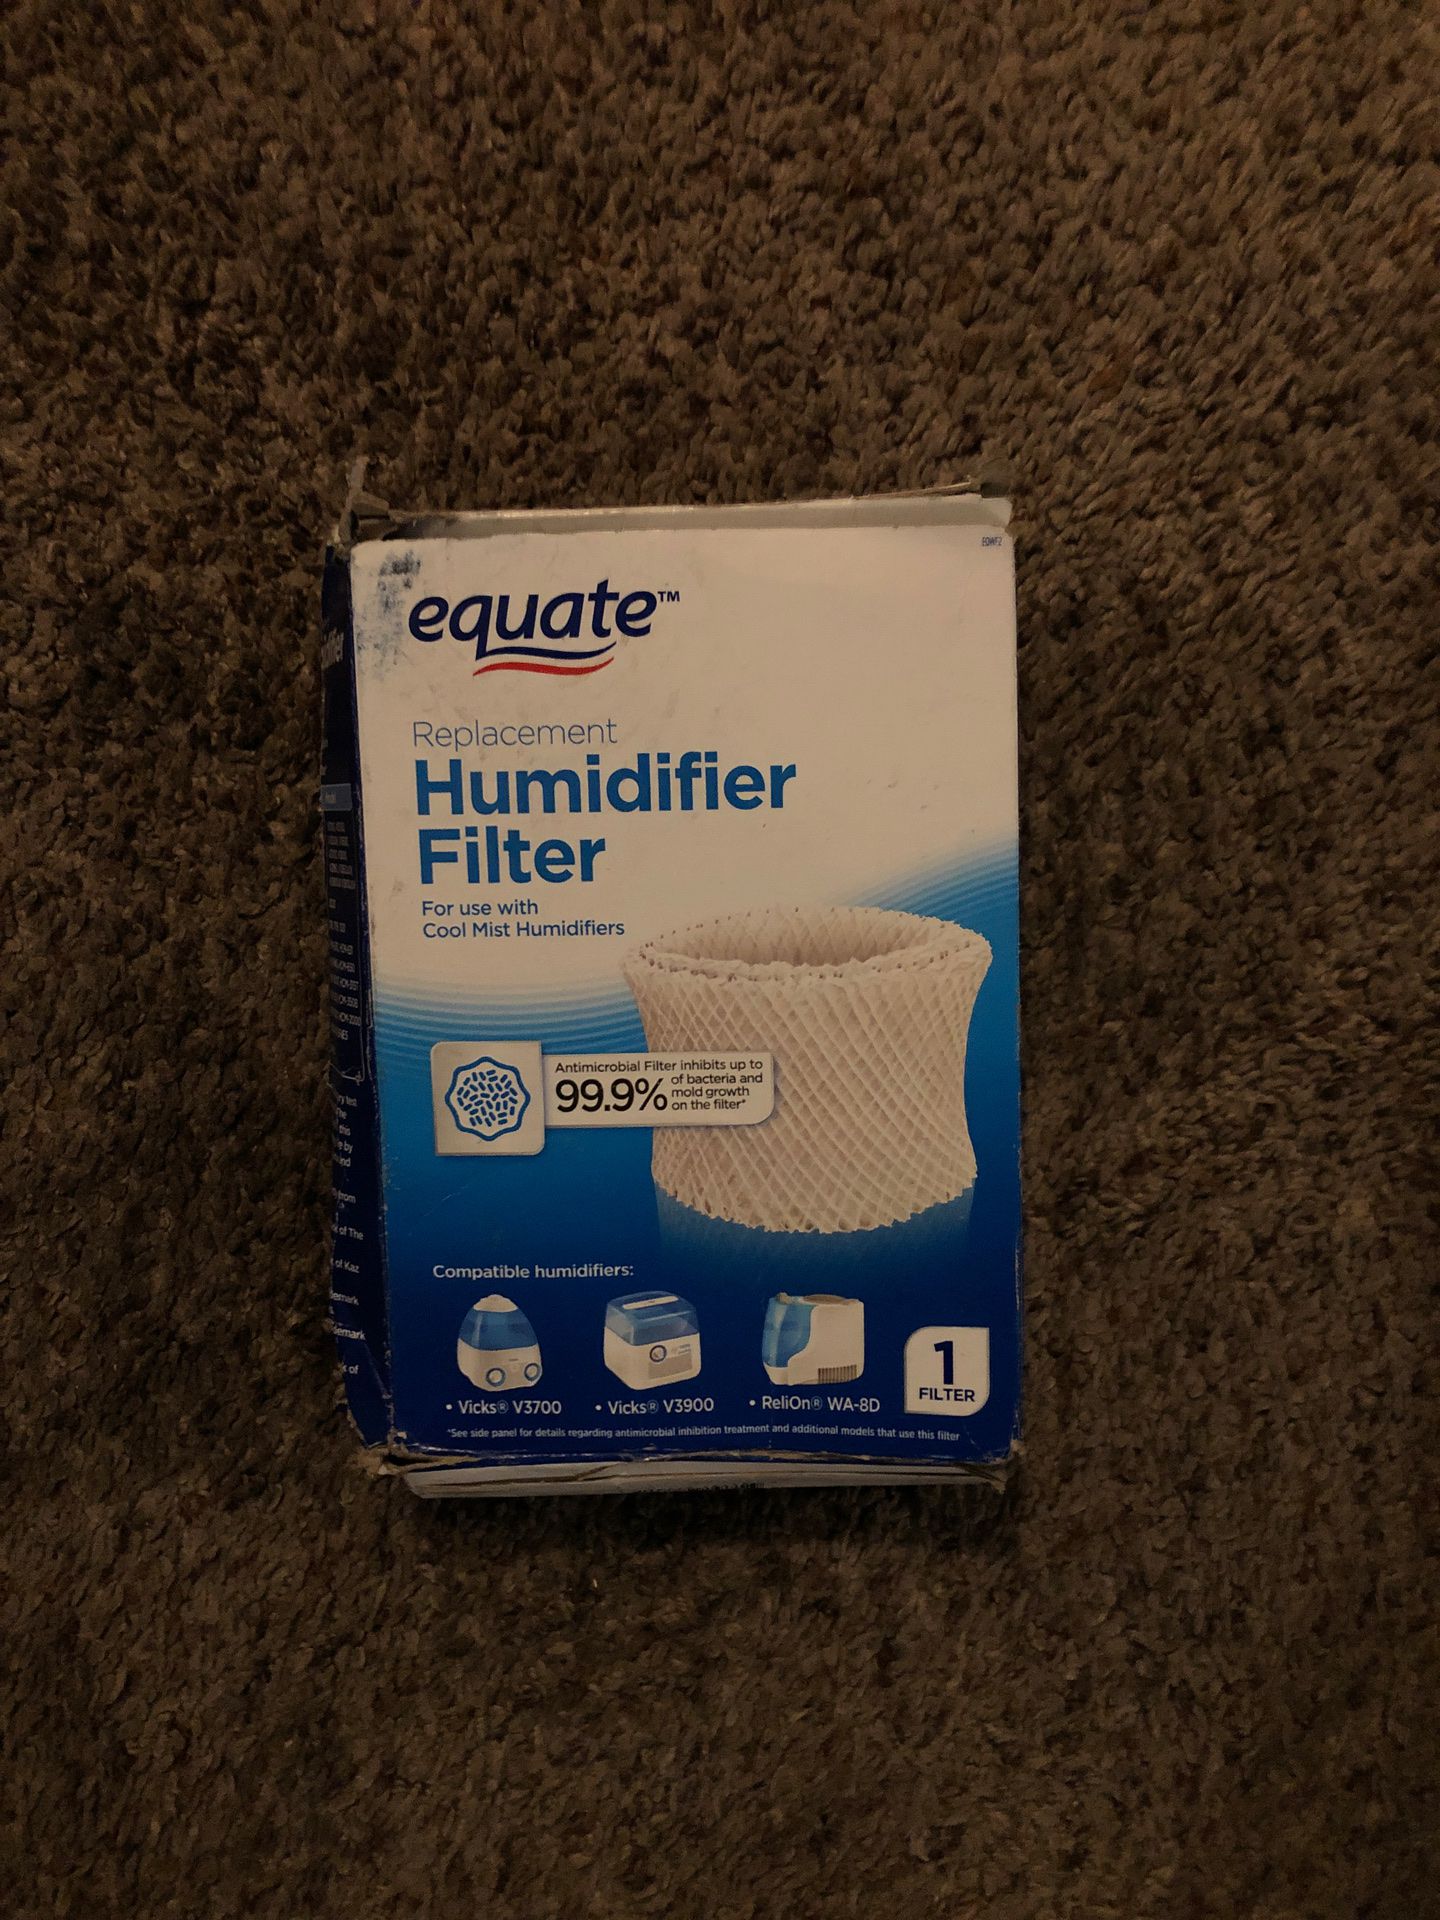 Humidifier filter